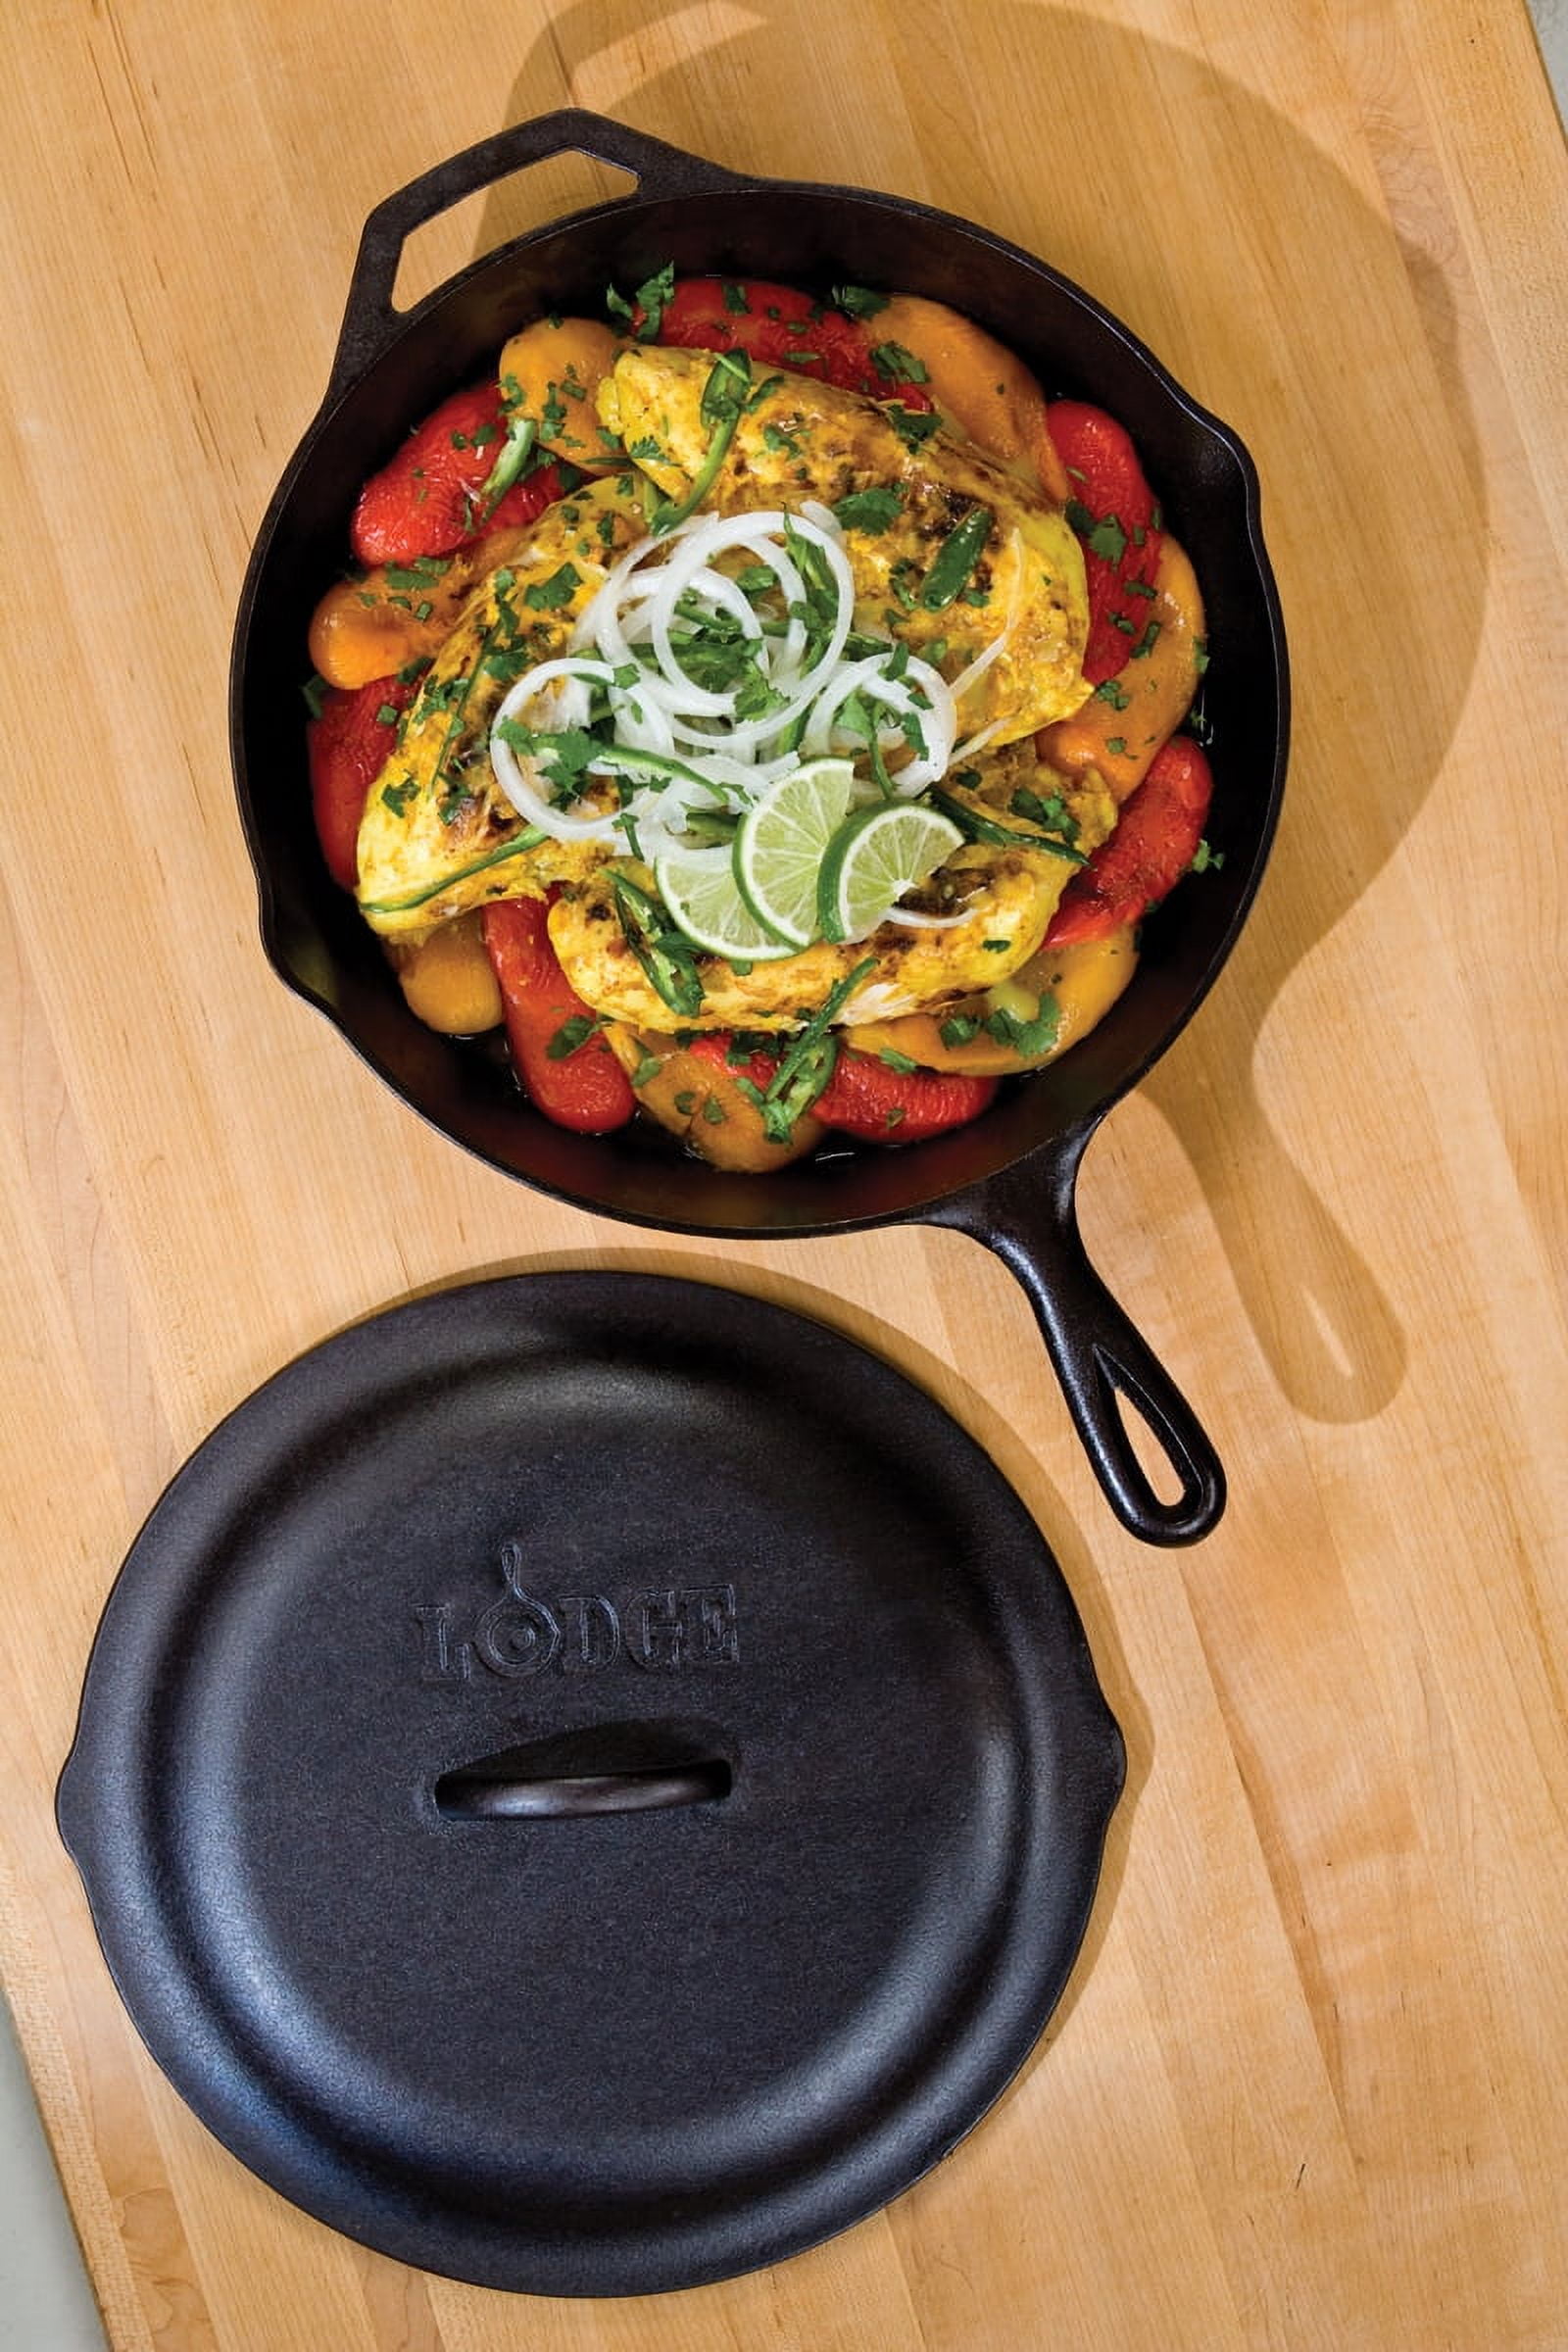 Cast Iron Skillet 6.5 Inch by Lodge –